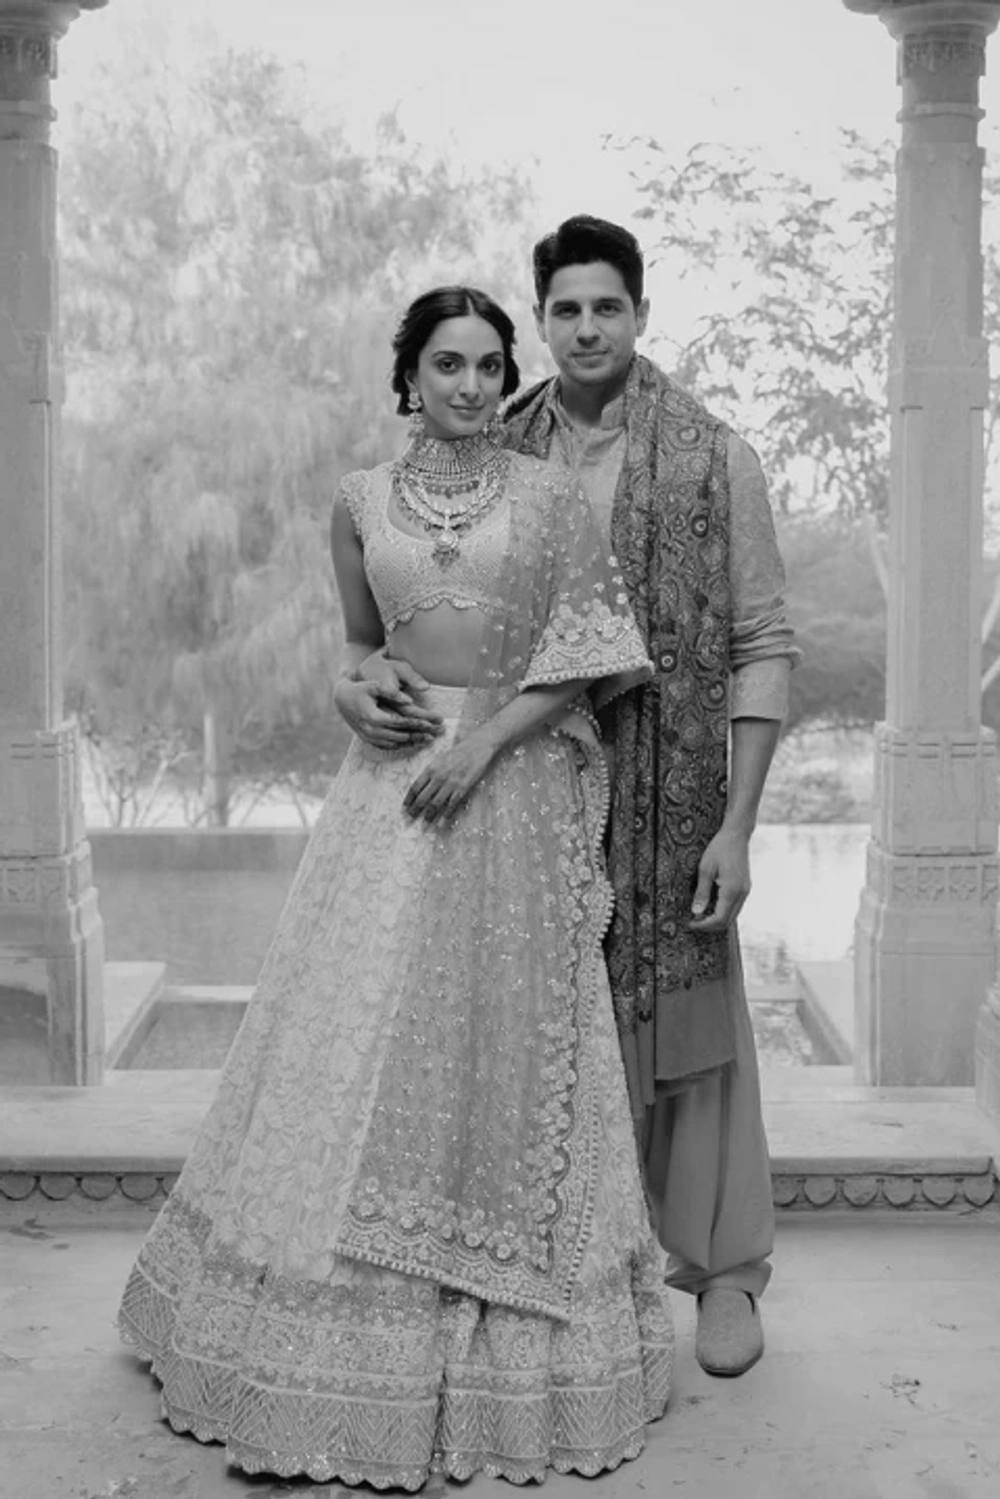 Bride: Kiara & Groom:  Sidharth in our Customized Outfits for Mehendi